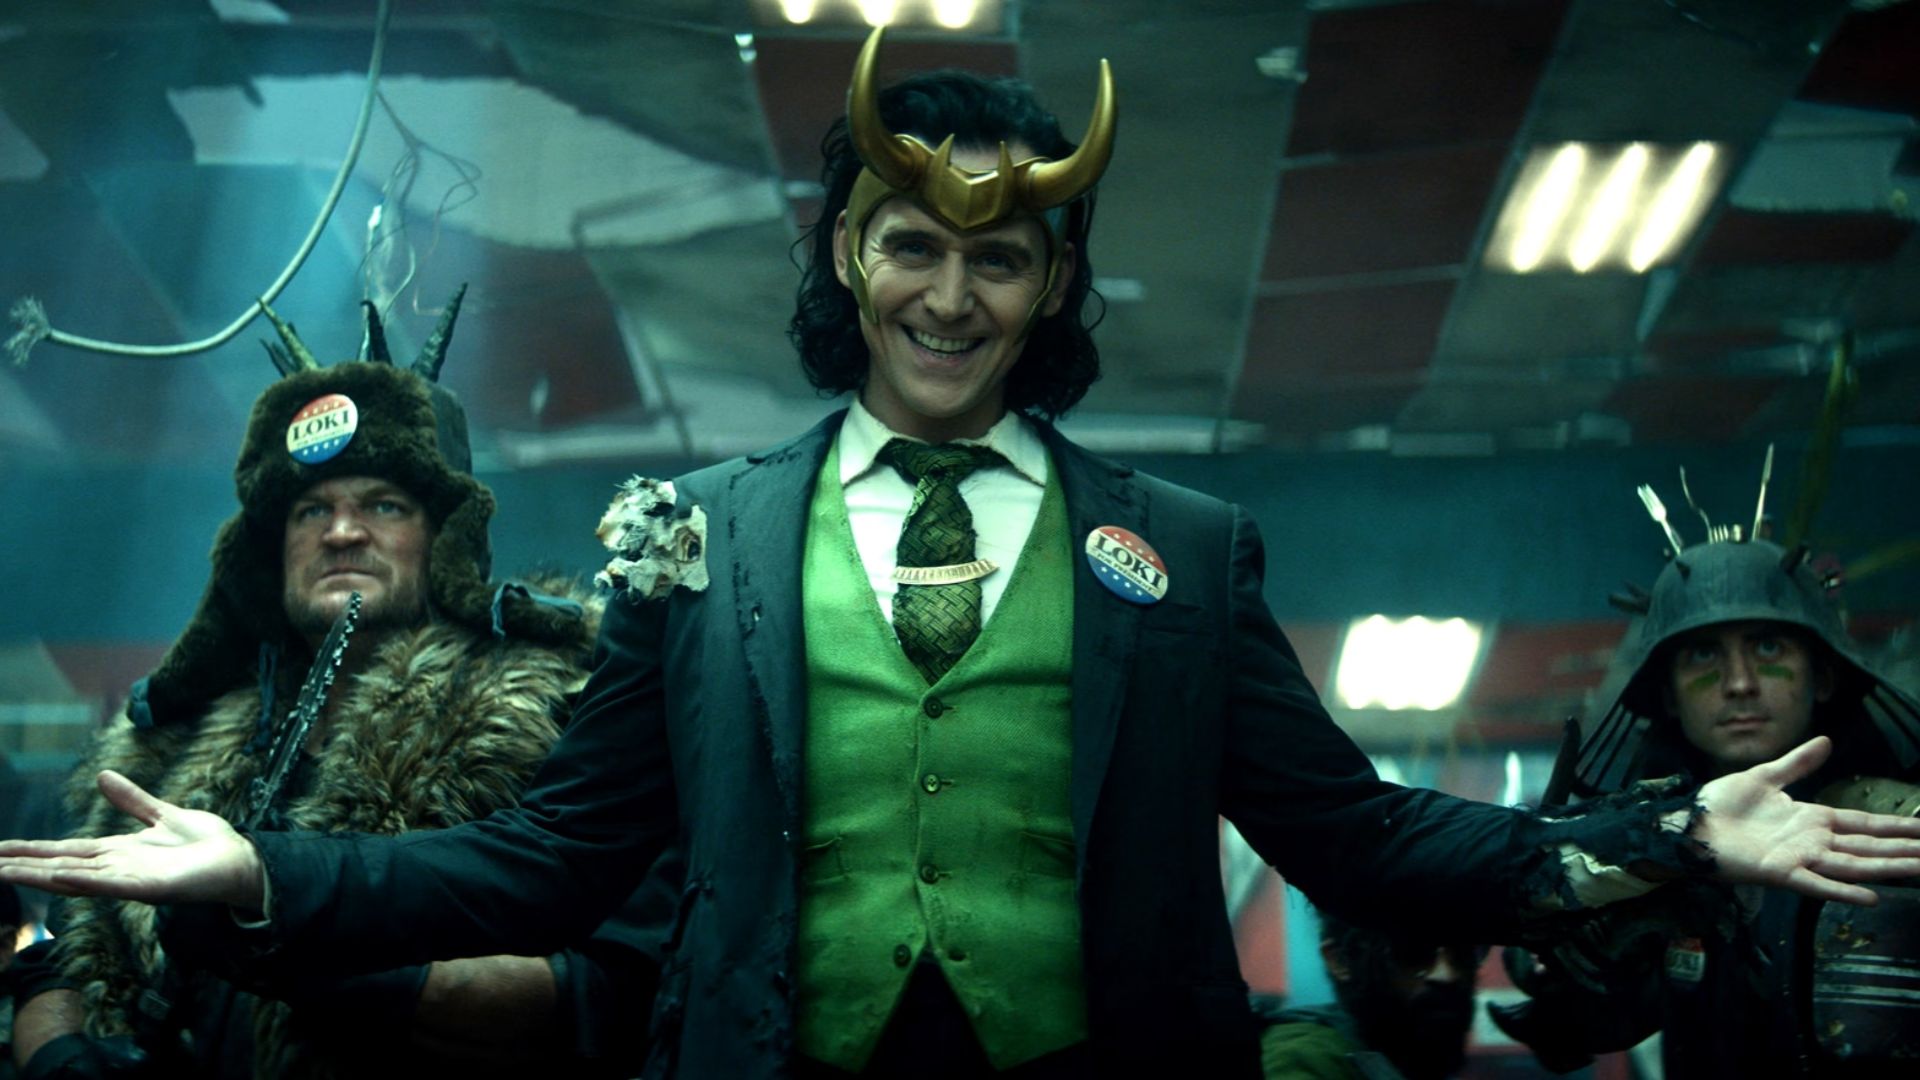 Loki from Marvel dressed in a suit while wearing his golden horn, smiling